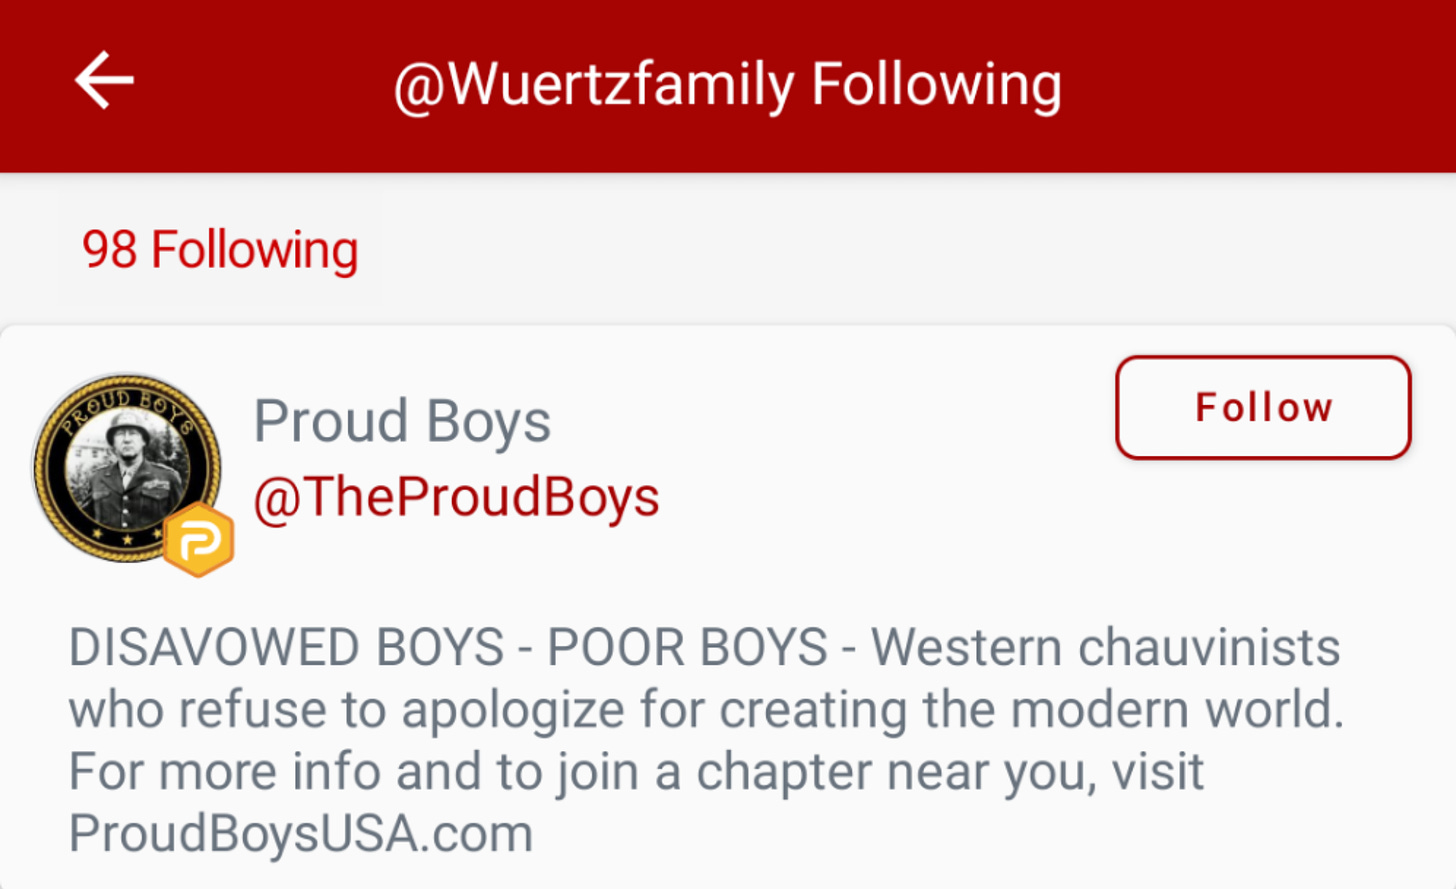 Proof of @WuertzFamily—purportedly Drake Wuertz’s wife—following the official Proud Boys account on Parler. (Image: Parler screenshot)